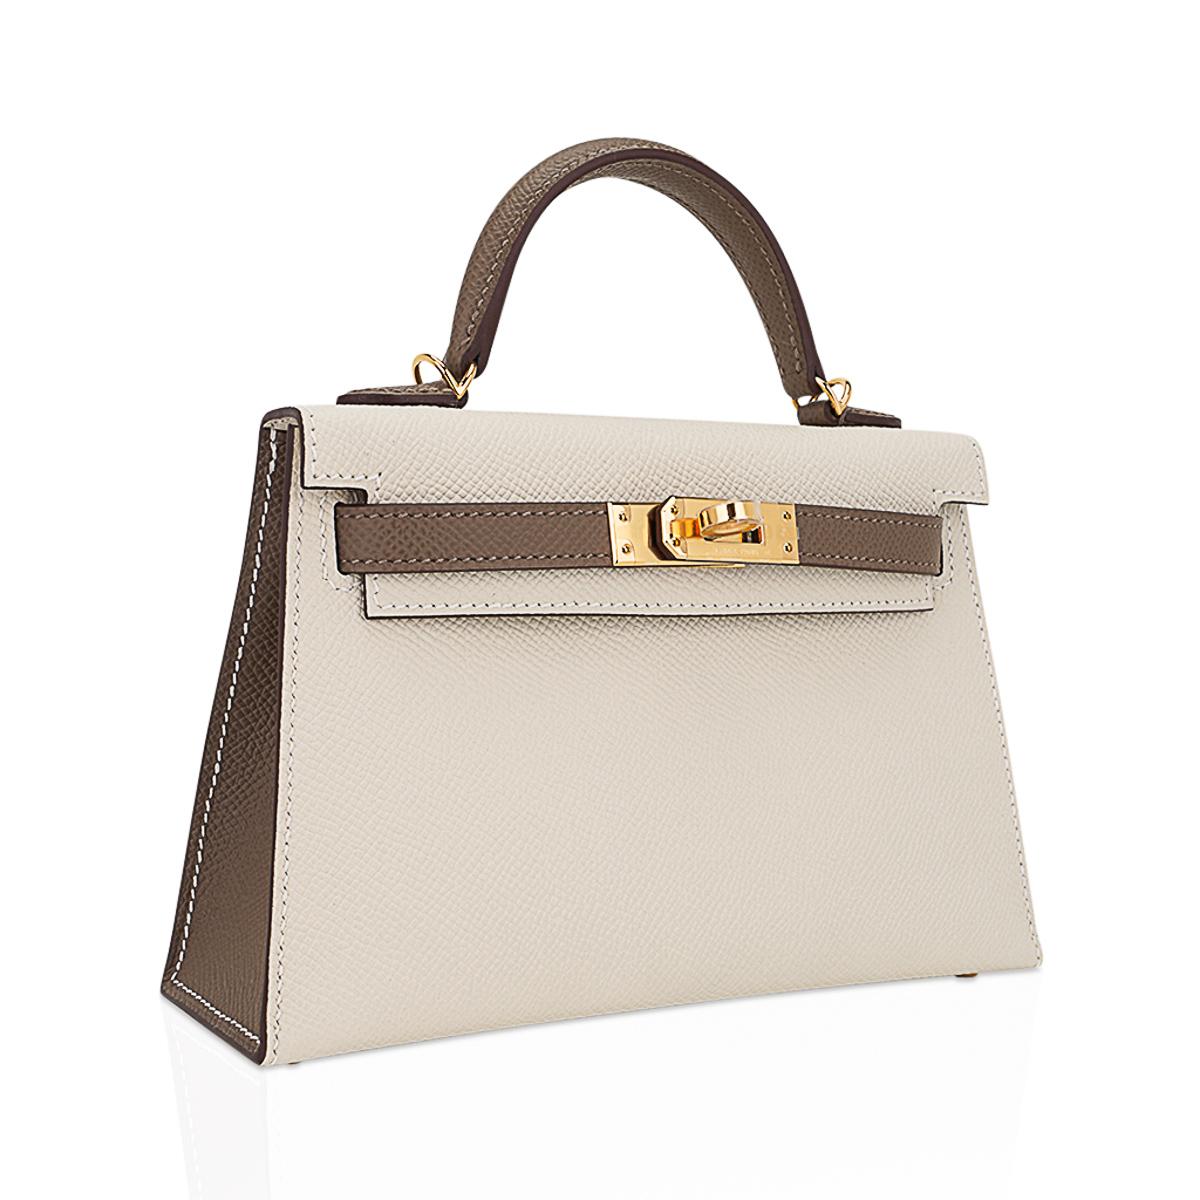 Mightychic offers anHermes Kelly HSS 20 Sellier bag featured in coveted Craie and Etoupe.
A stunning neutral color combination for year round wear.
Epsom leather accentuated with Gold hardware.
Comes with signature Hermes box, shoulder strap, and